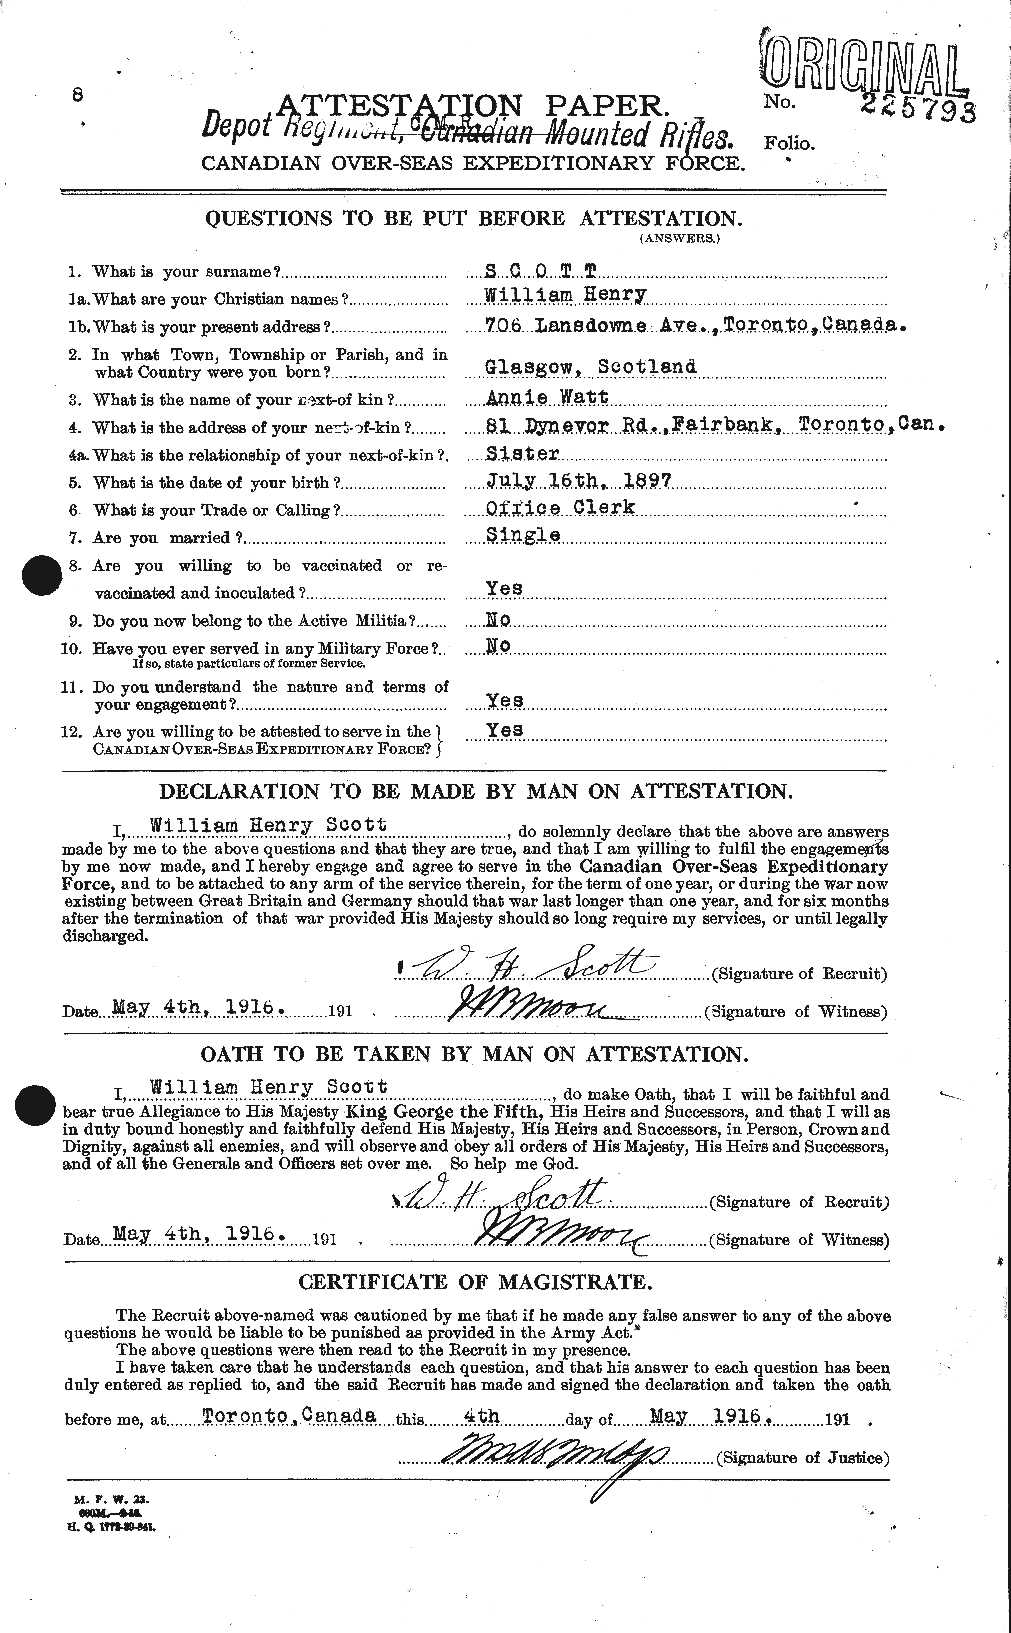 Personnel Records of the First World War - CEF 087000a